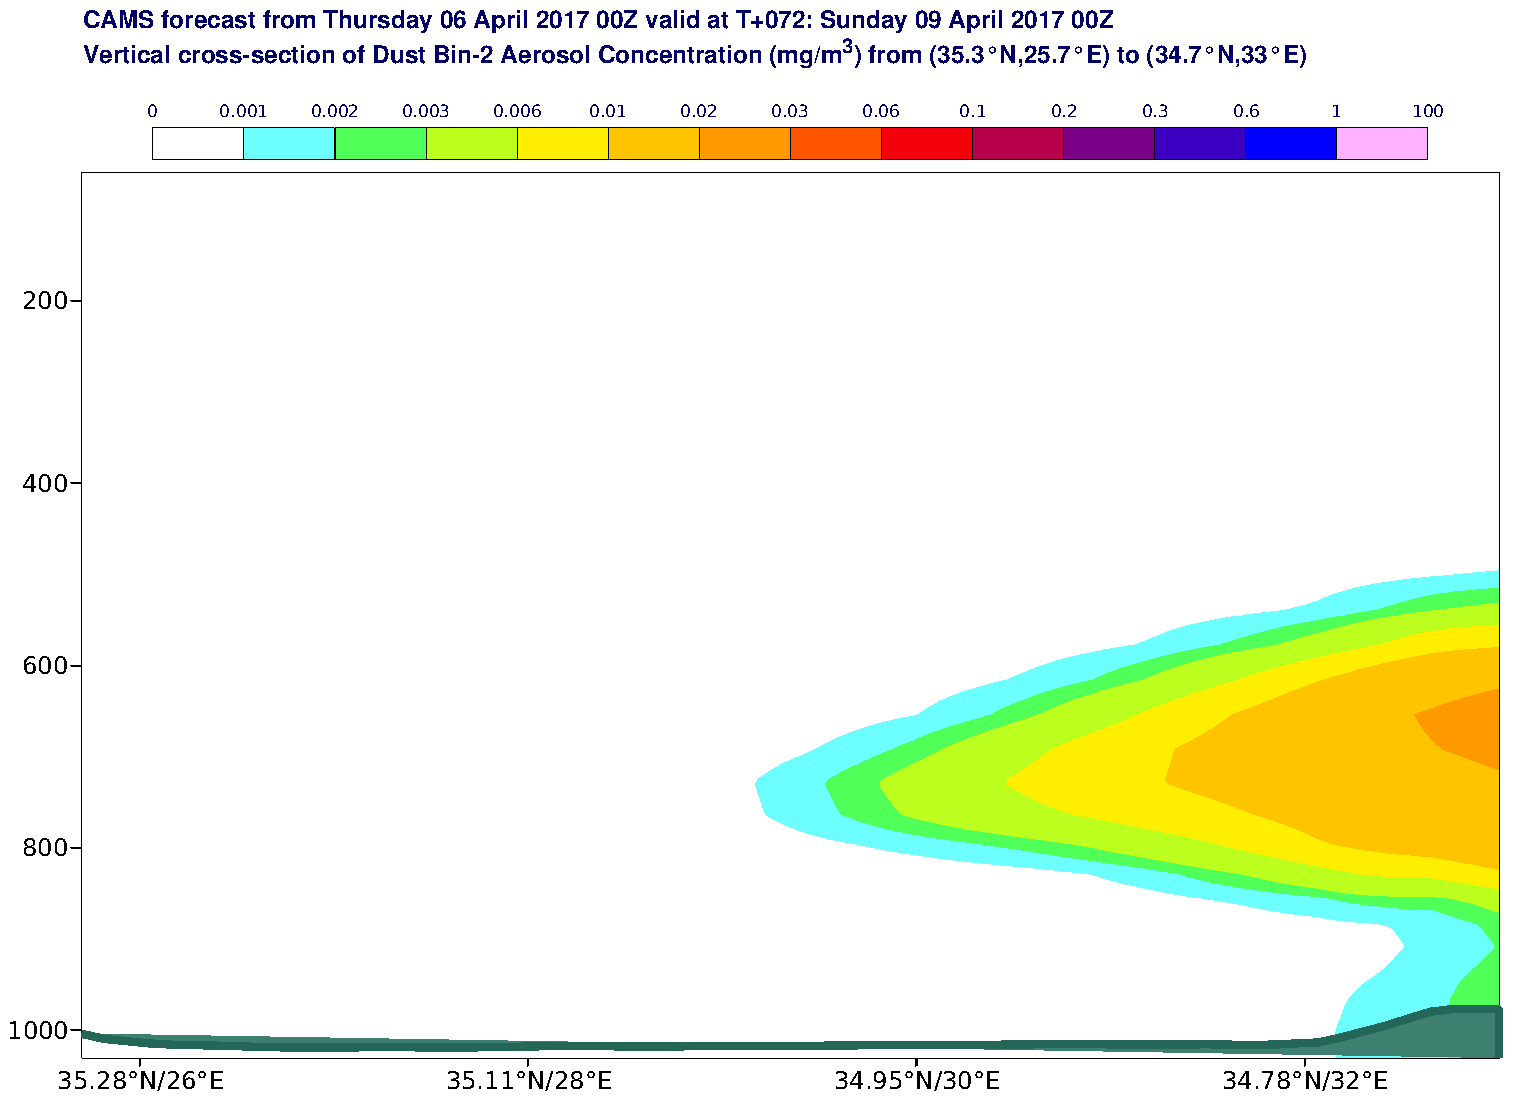 Vertical cross-section of Dust Bin-2 Aerosol Concentration (mg/m3) valid at T72 - 2017-04-09 00:00